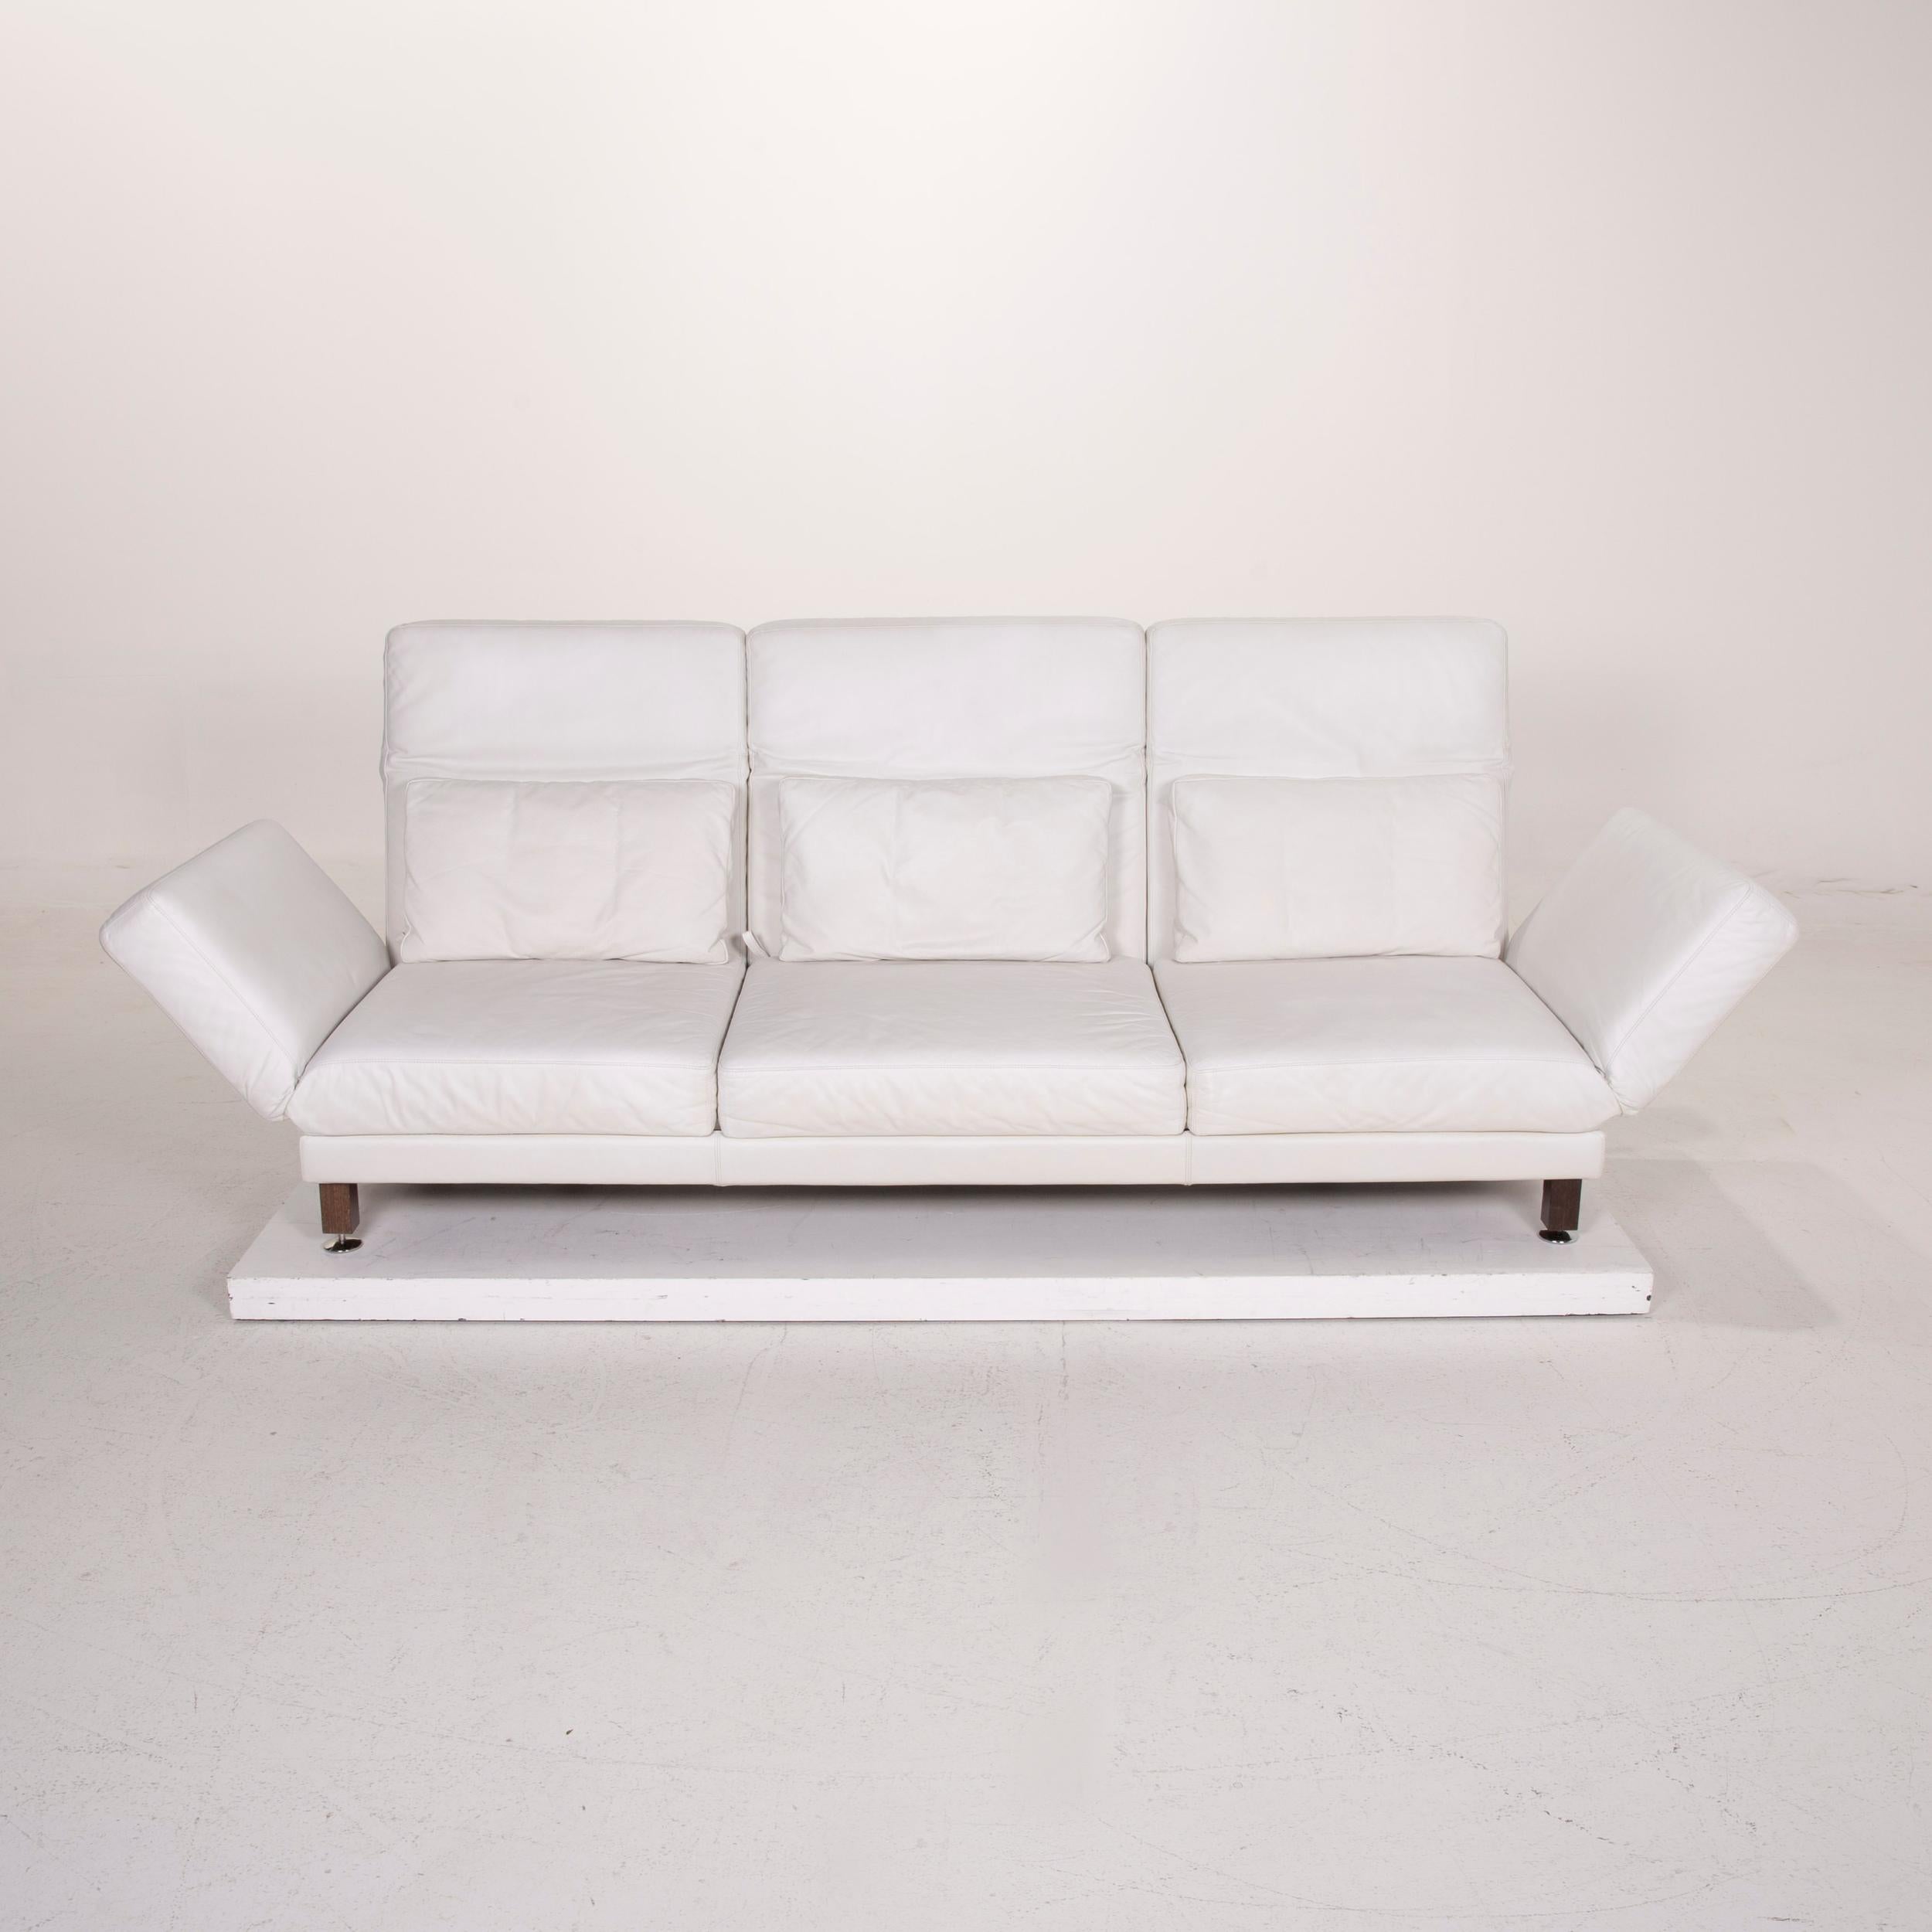 Brühl & Sippold Moule Leather Sofa Set White Three-Seat Relax Function Stool For Sale 9